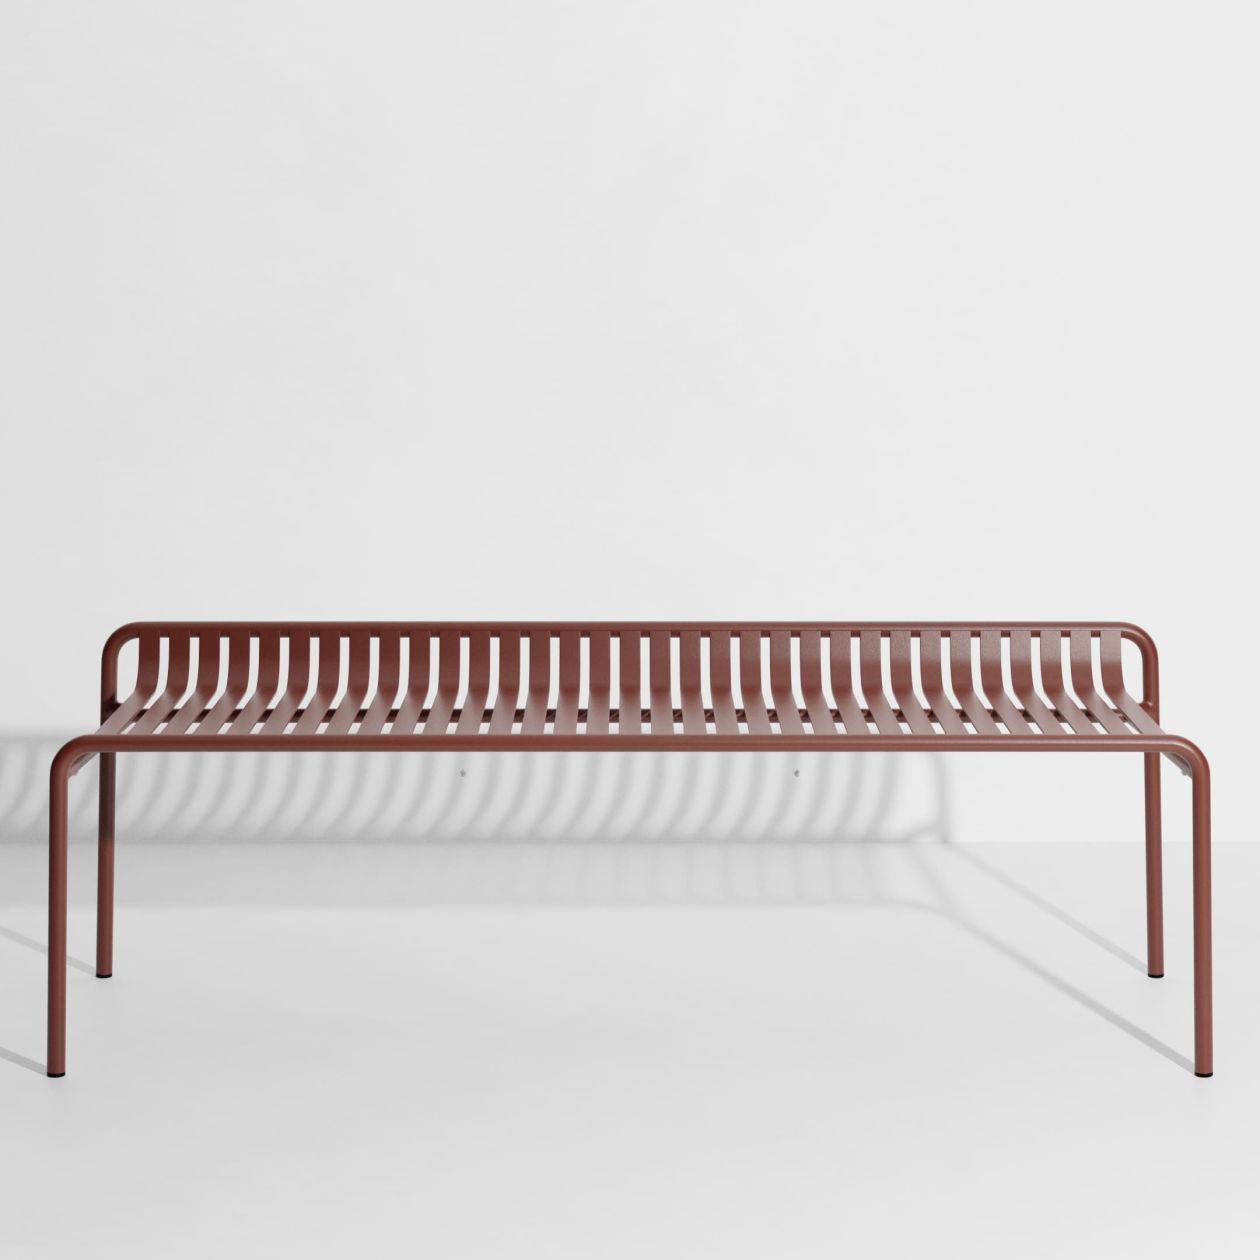 Week-End Backless Bench - Red brown